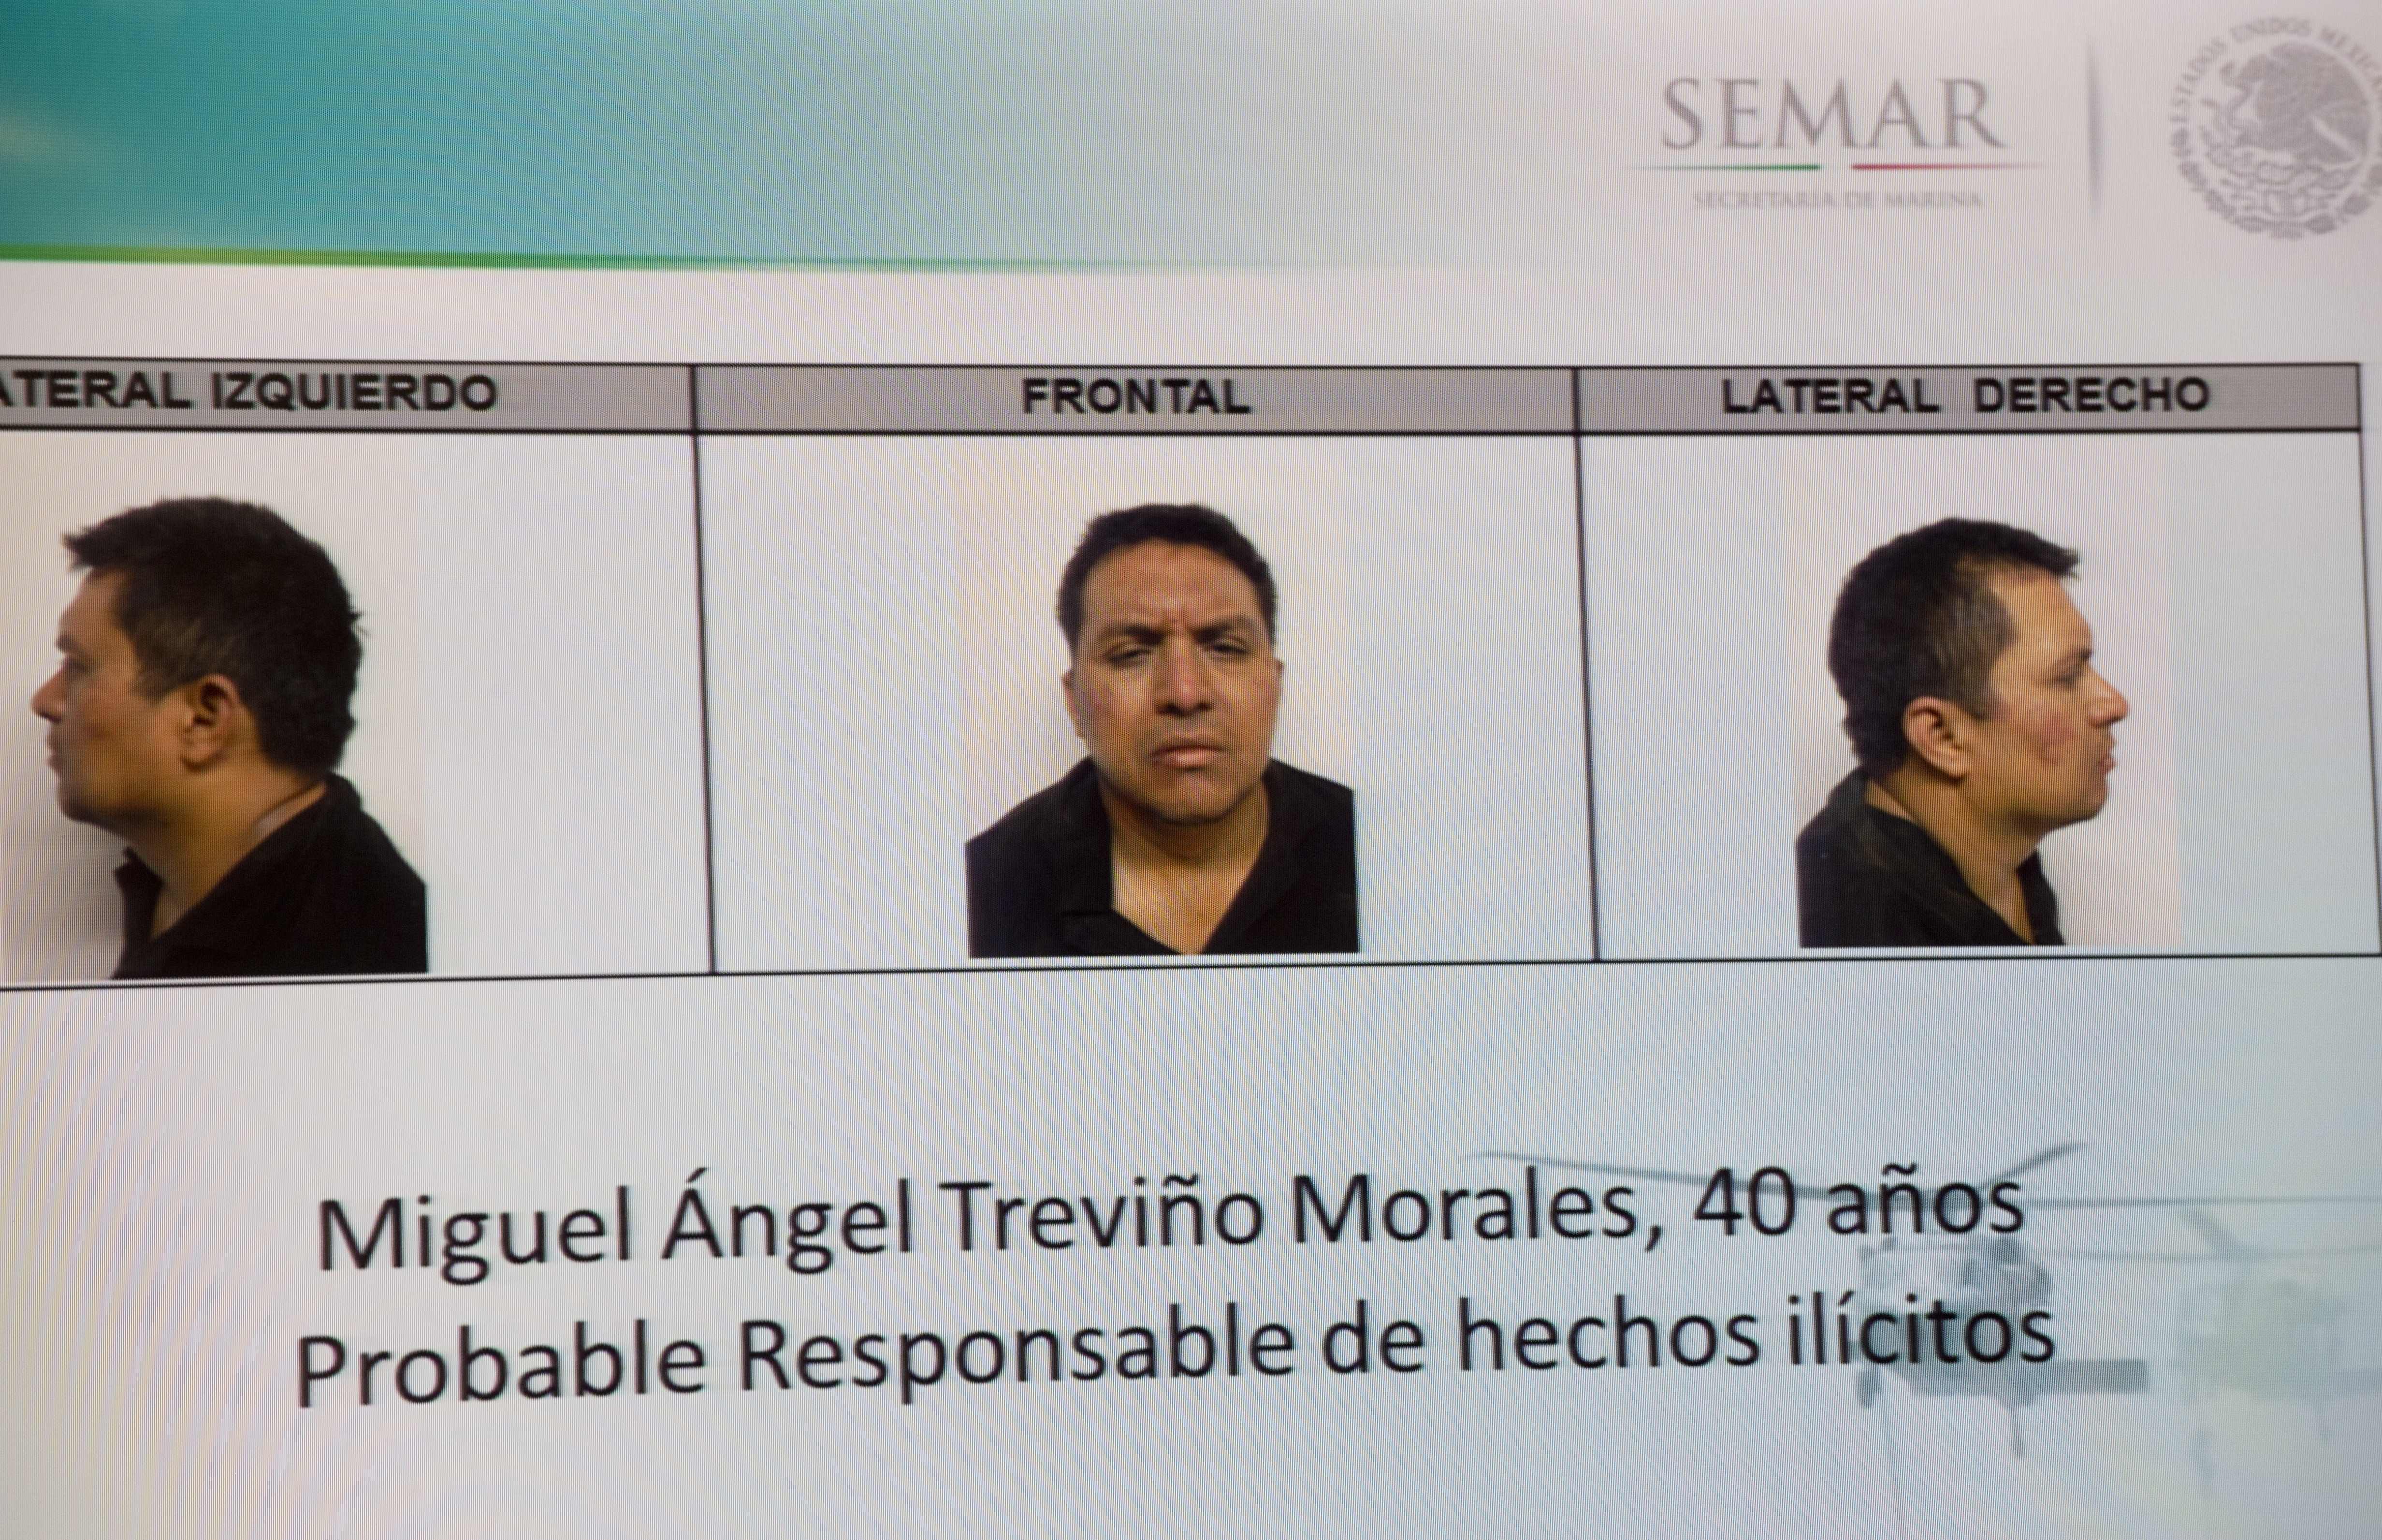 Picture taken from a sreen of the alleged maximun leader of drugs Mexican cartel "Los Zetas", Miguel Angel Trevino Morales, presented in combo pictures during a press conference at the head quarter of Interior Ministry on July 15, 2013 in Mexico City. According to a spokesman Trevino was arrested early morning during a military operation en Nuevo Laredo. AFP PHOTO/ Yuri CORTEZ (Photo credit should read YURI CORTEZ/AFP/Getty Images)